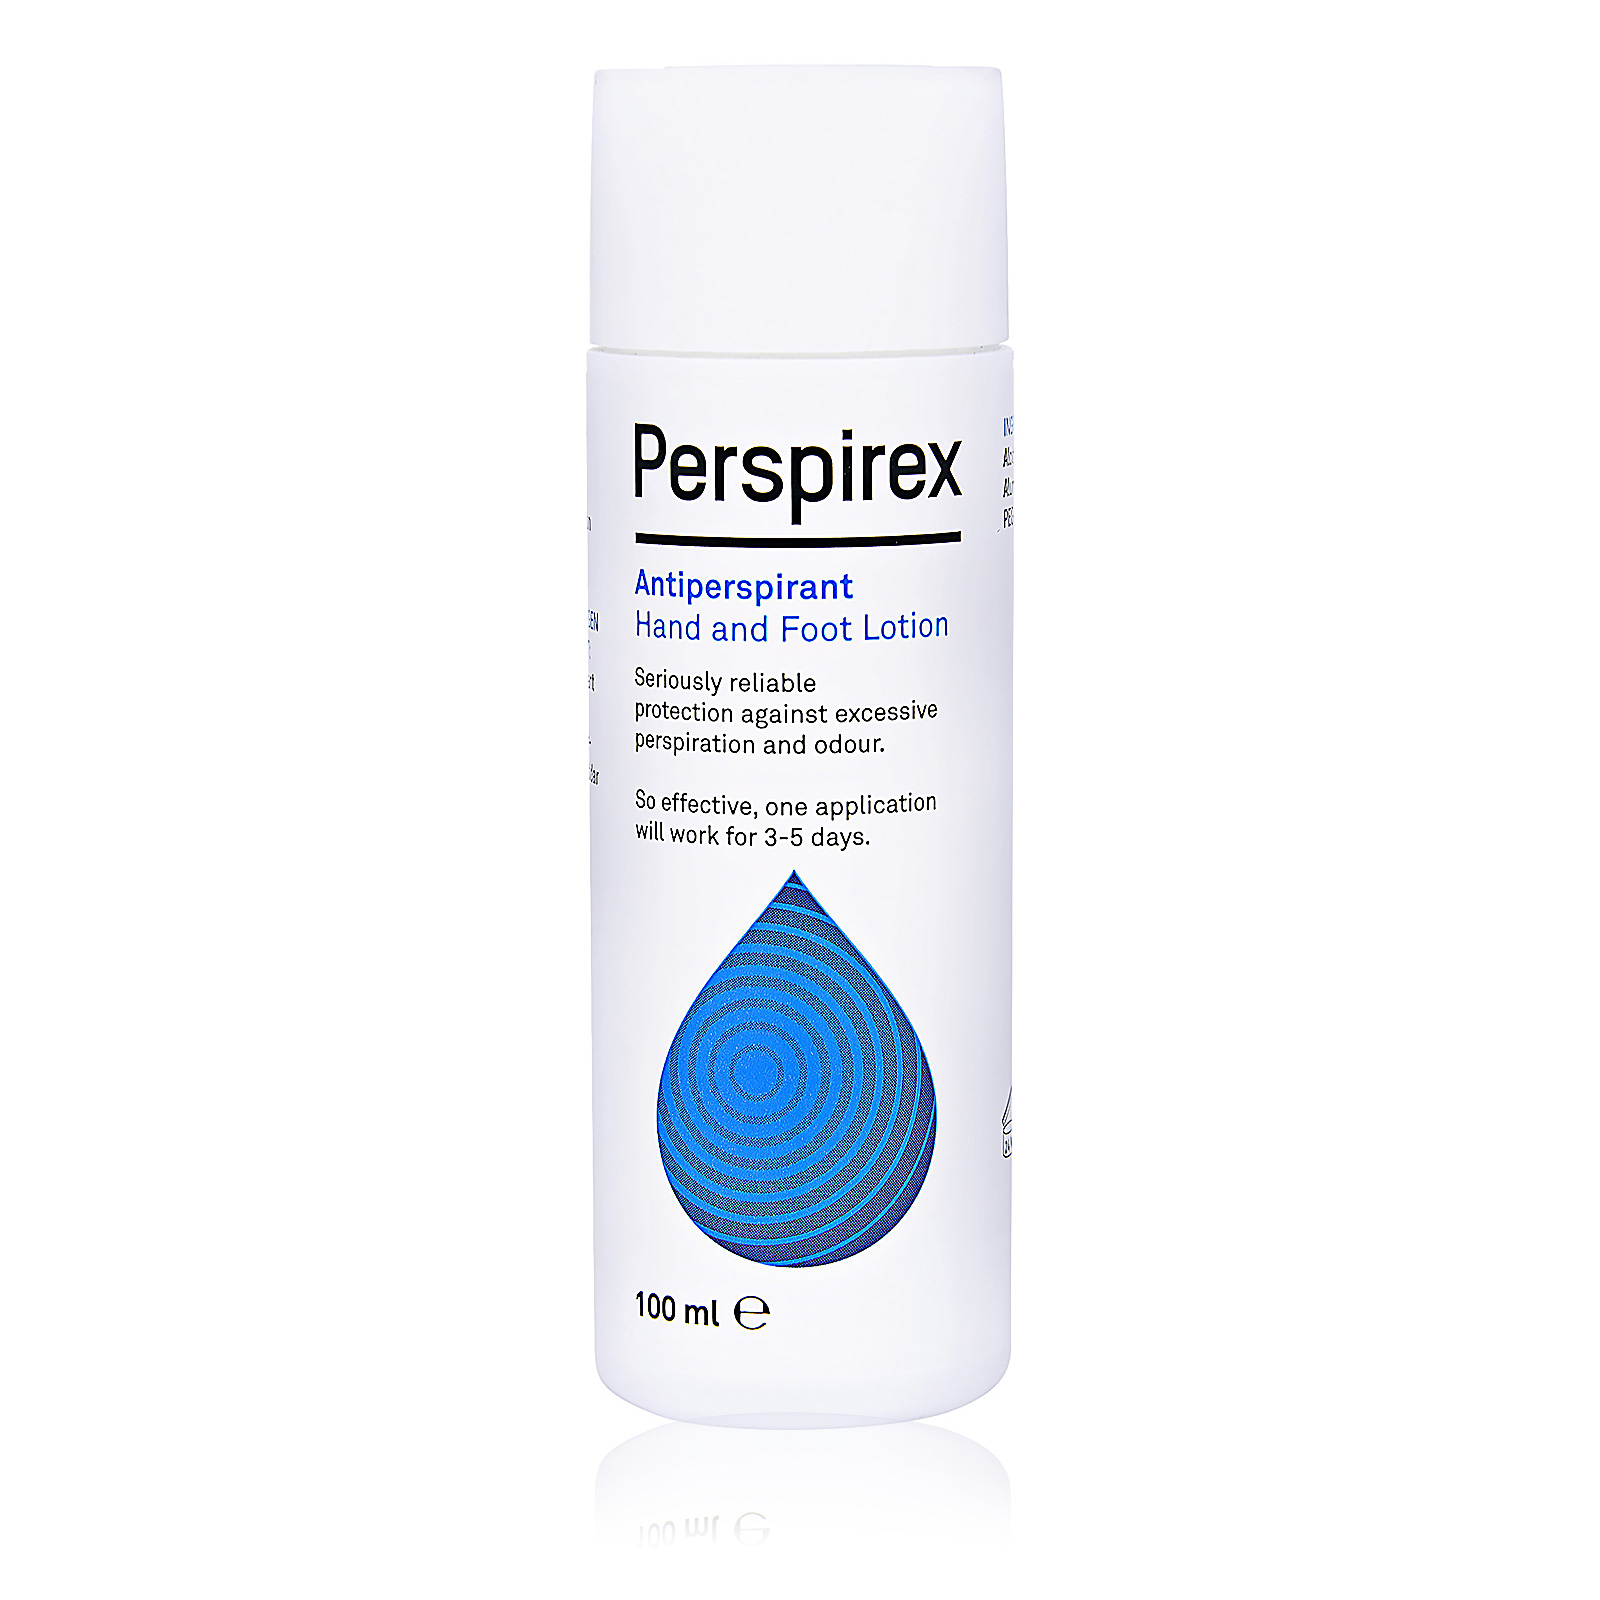 Antiperspirant Hand and Foot Lotion